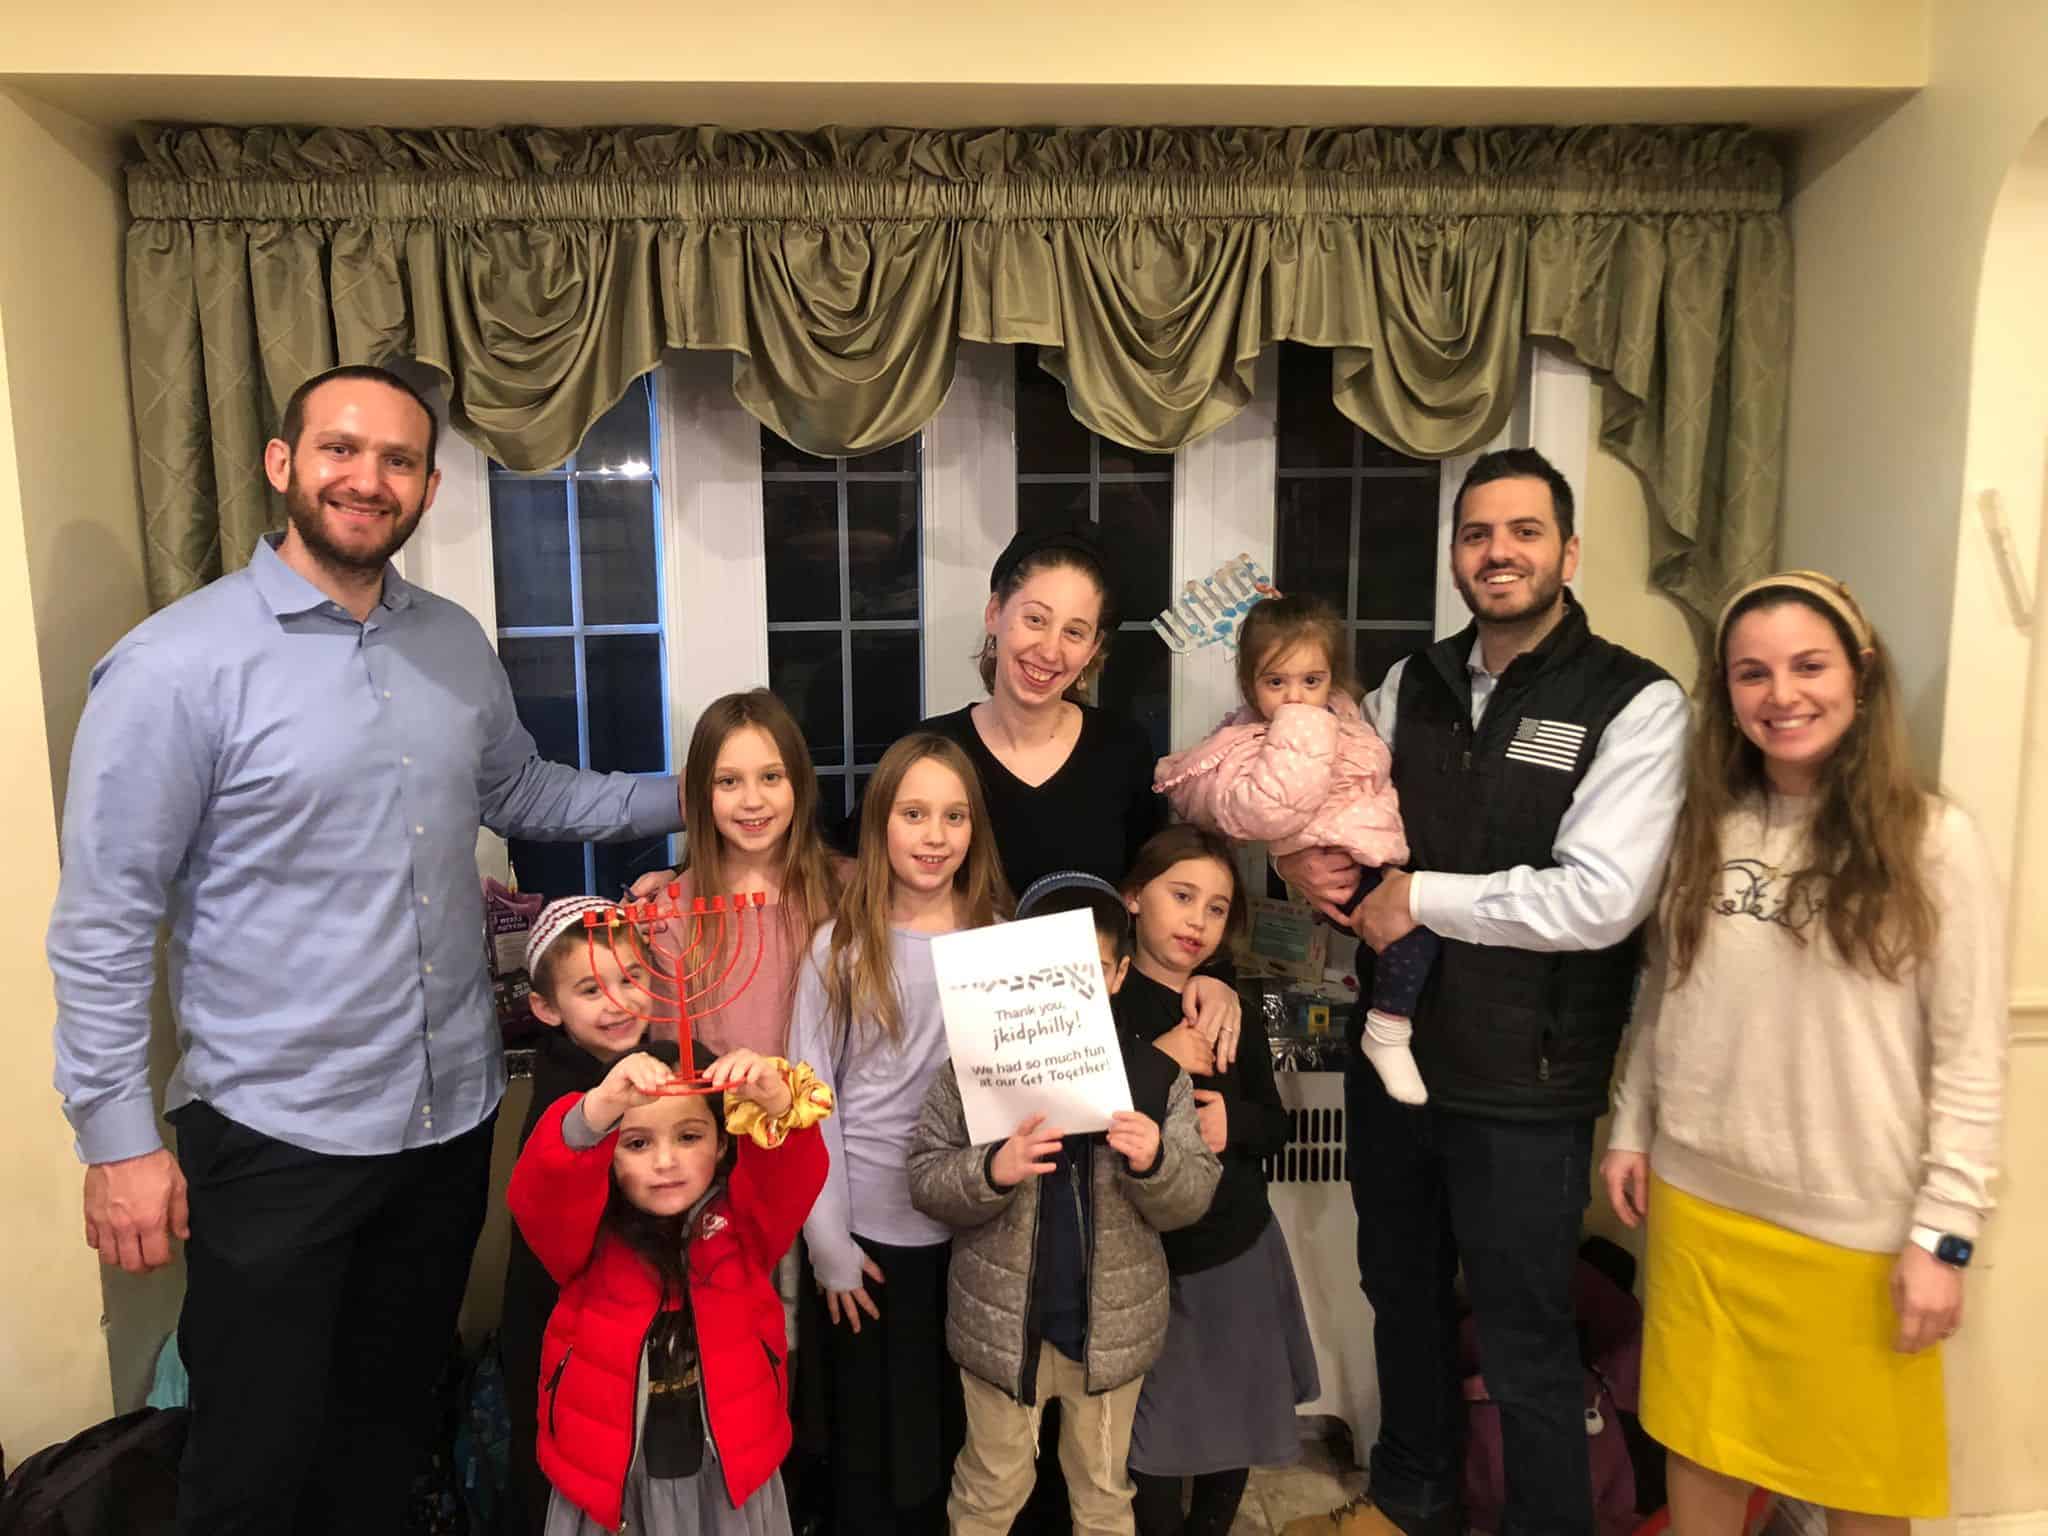 A photo of several adults and children standing and smiling together, with a sign that says thank you jkidphilly we had so much fun at our get together